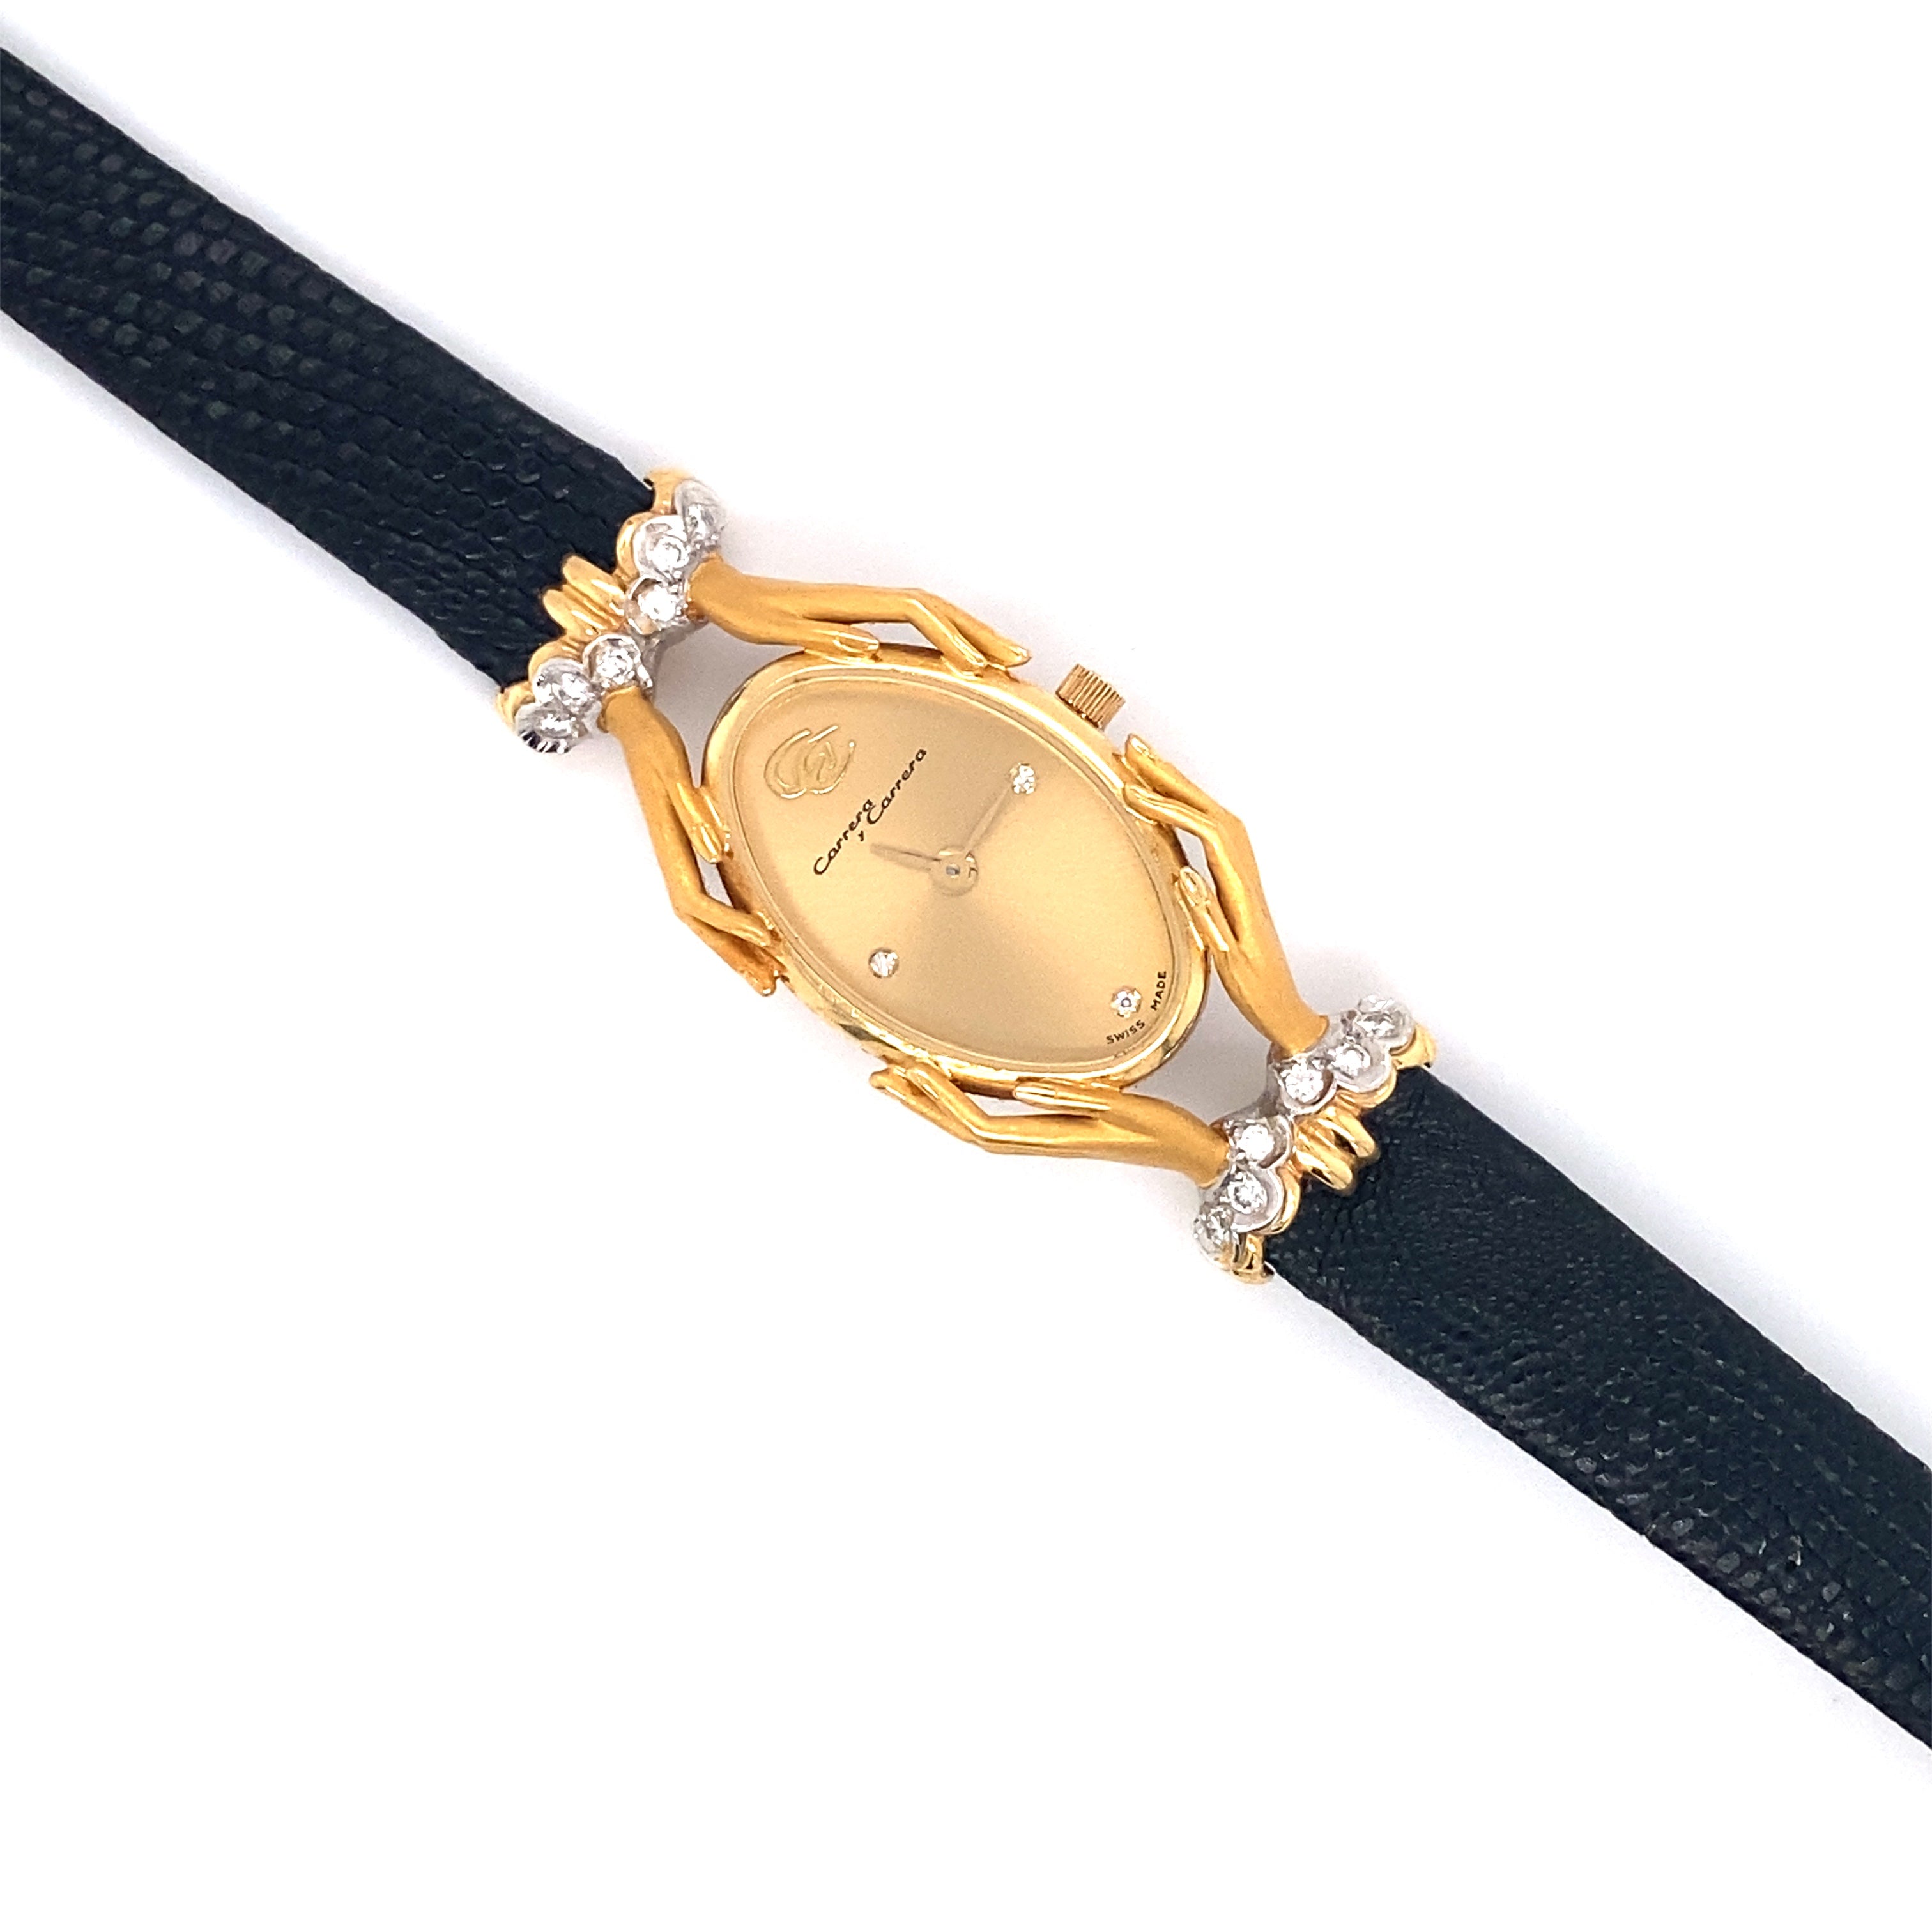 Carrera y Carrera Womens Wrist Watch with Lizard Band in 18K Gold - The  Verma Group